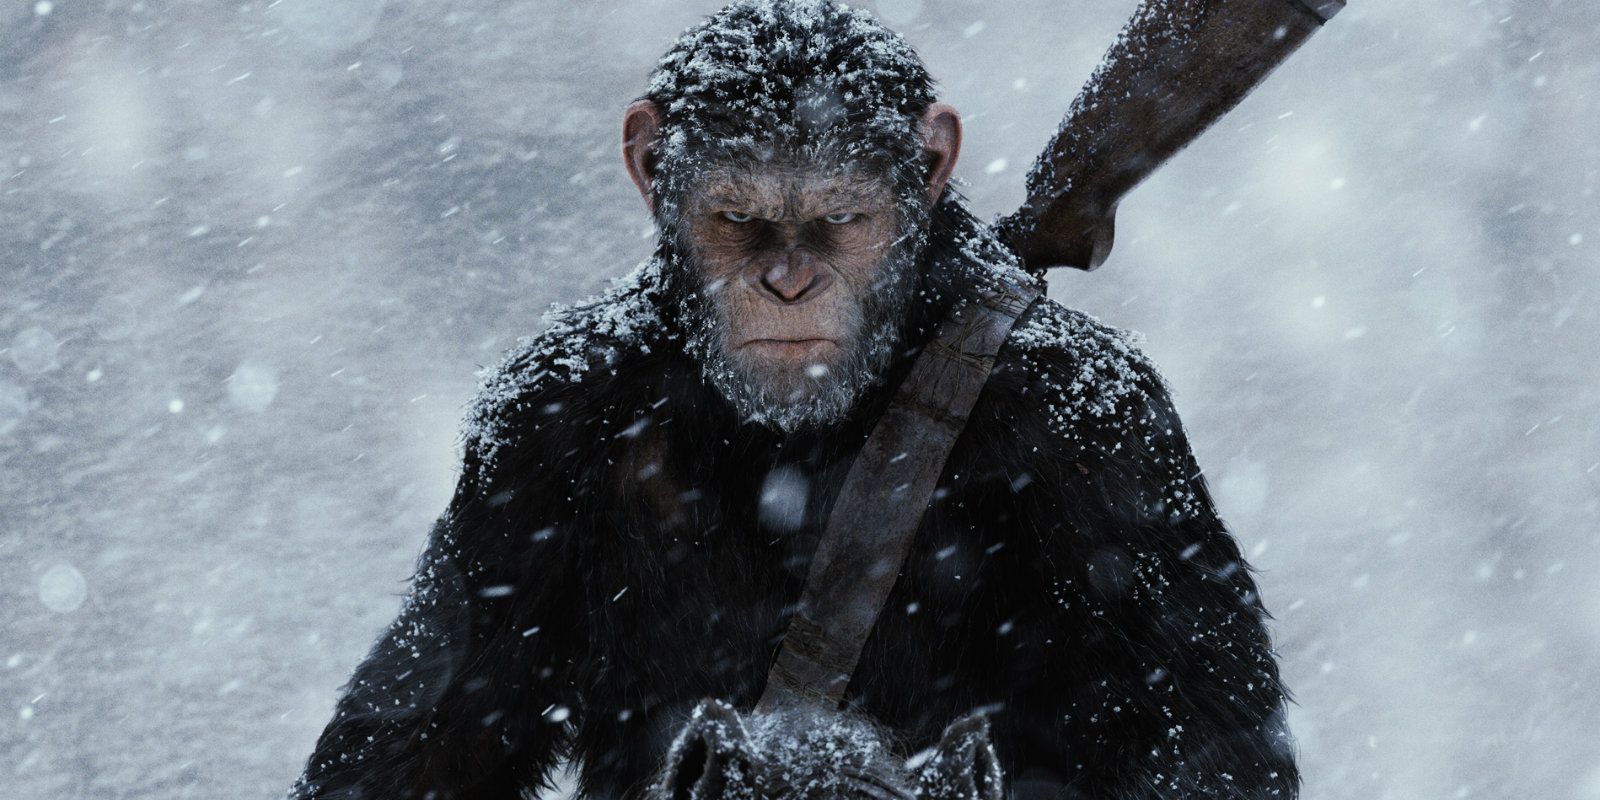 Planet Of The Apes’ Reboot Trilogy Rightfully Avoided The Original’s Twist